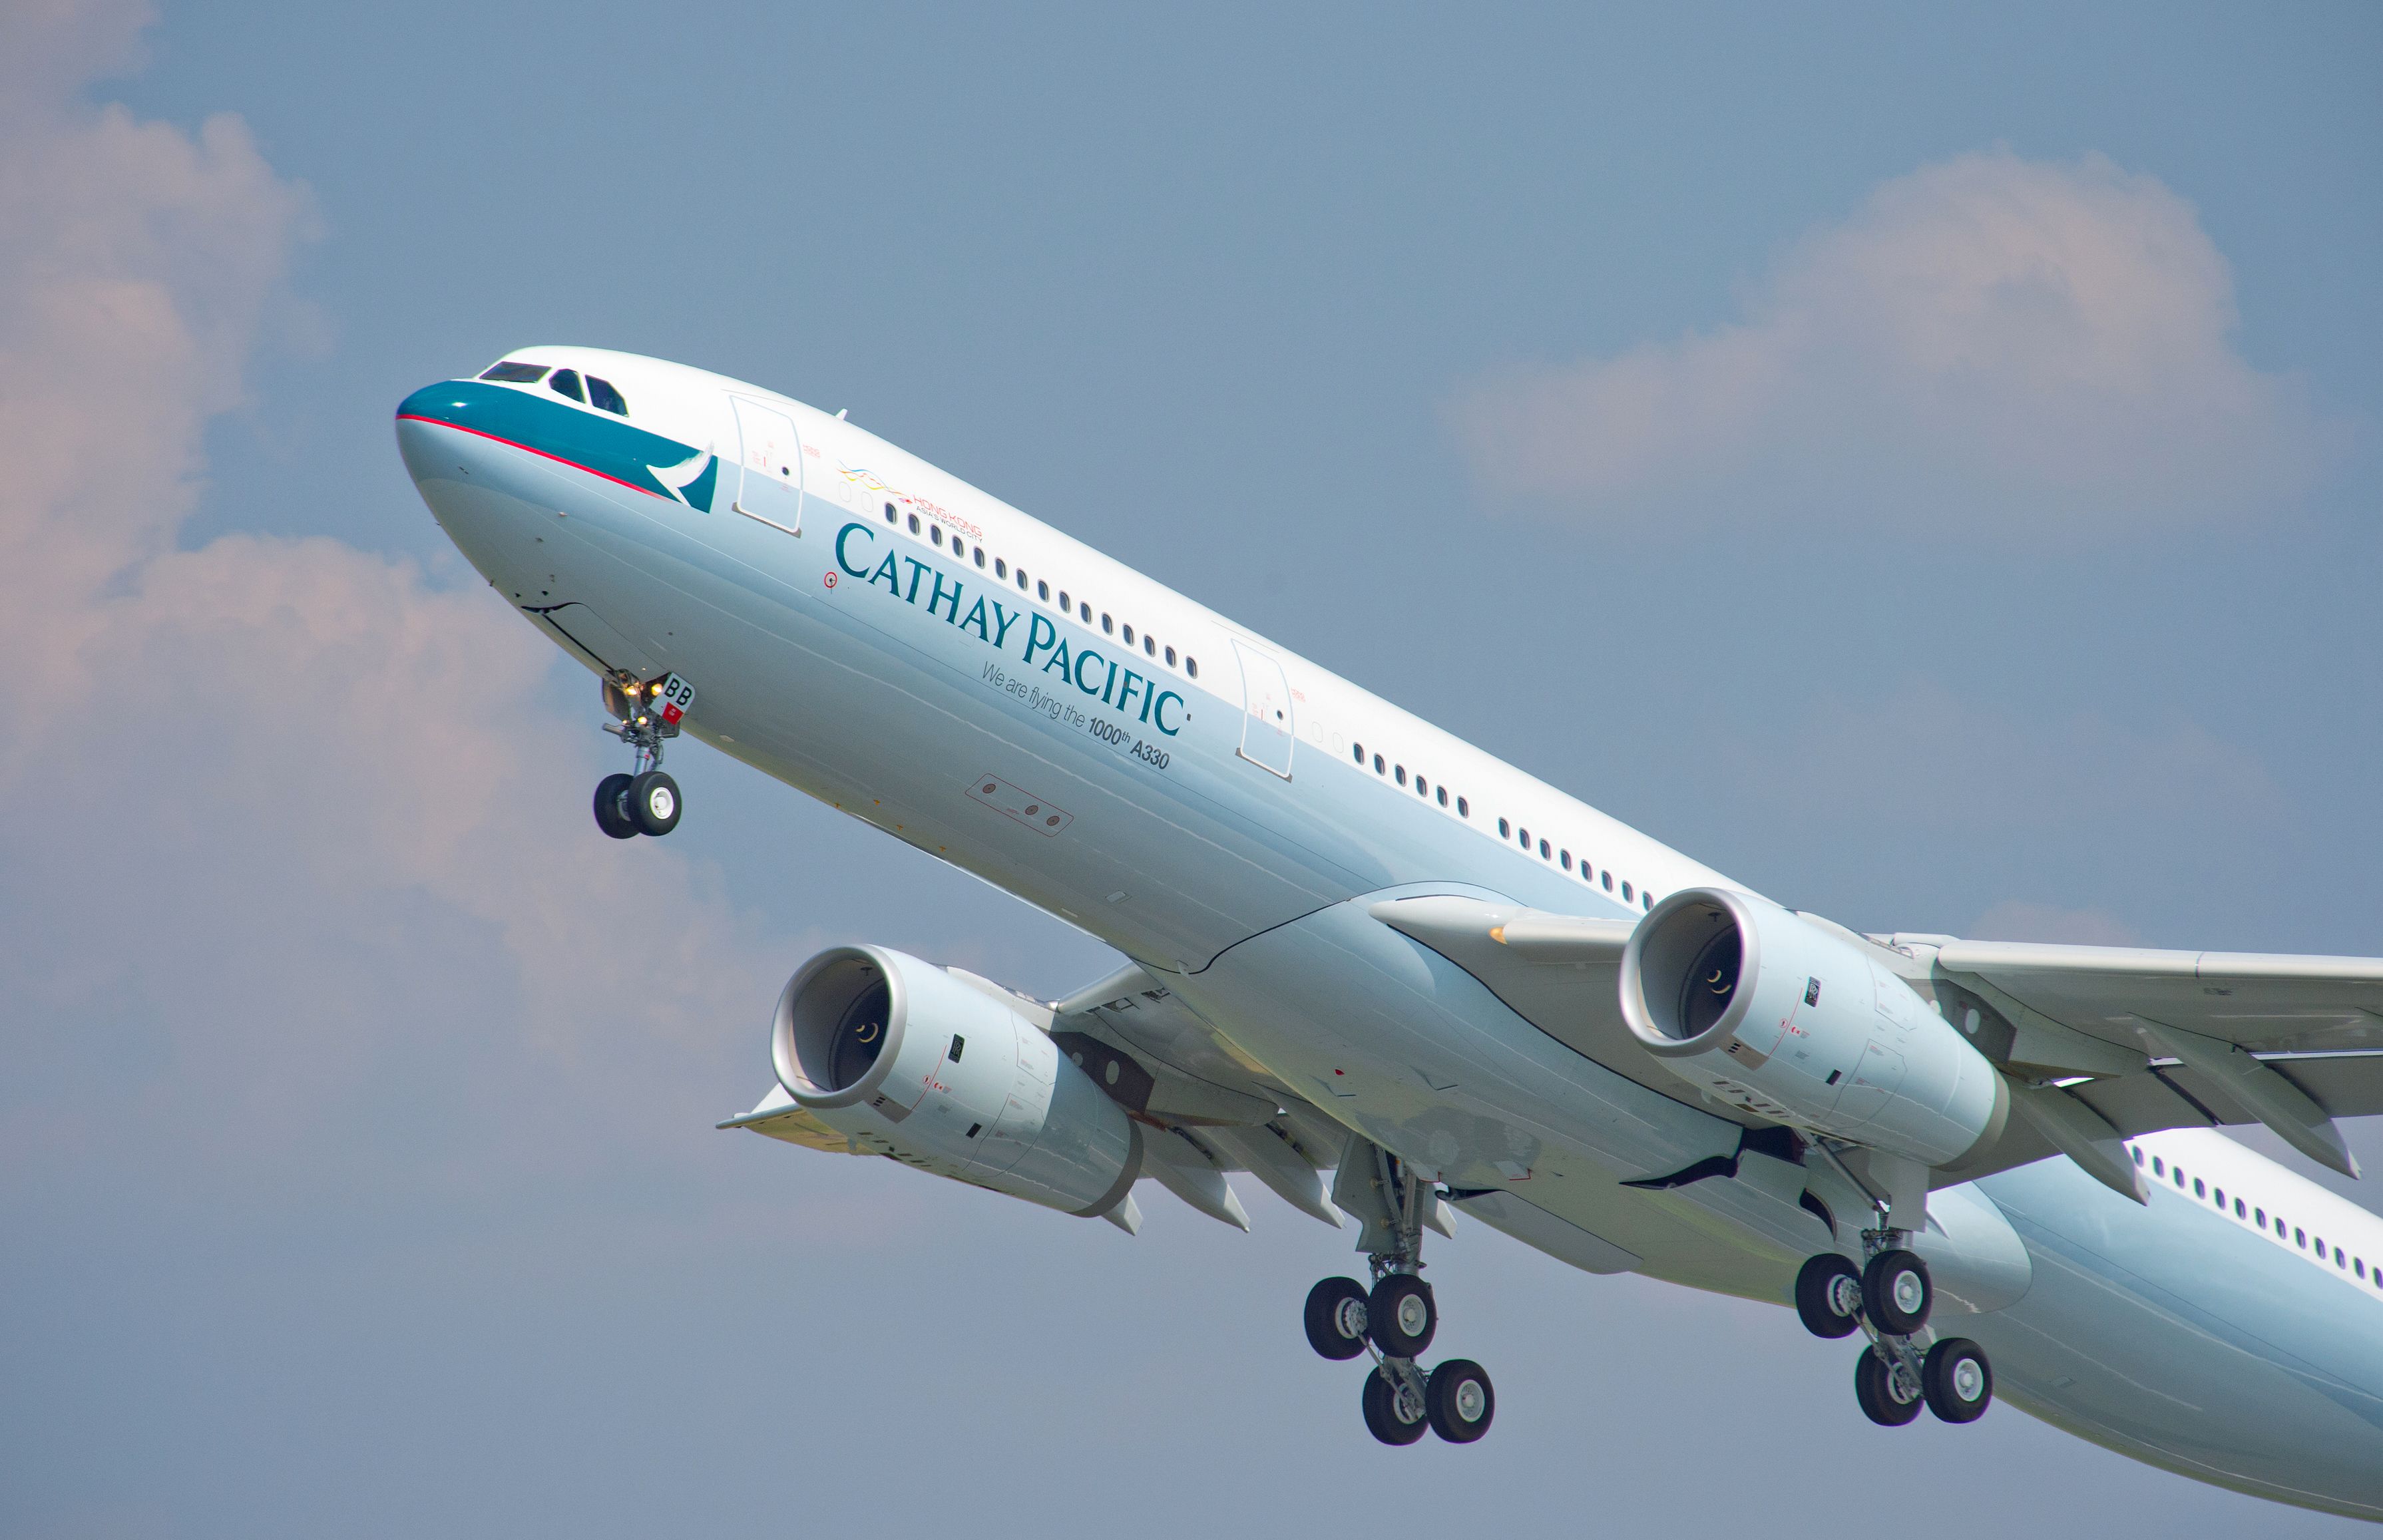 A Cathay Pacific Airbus A330 taking off